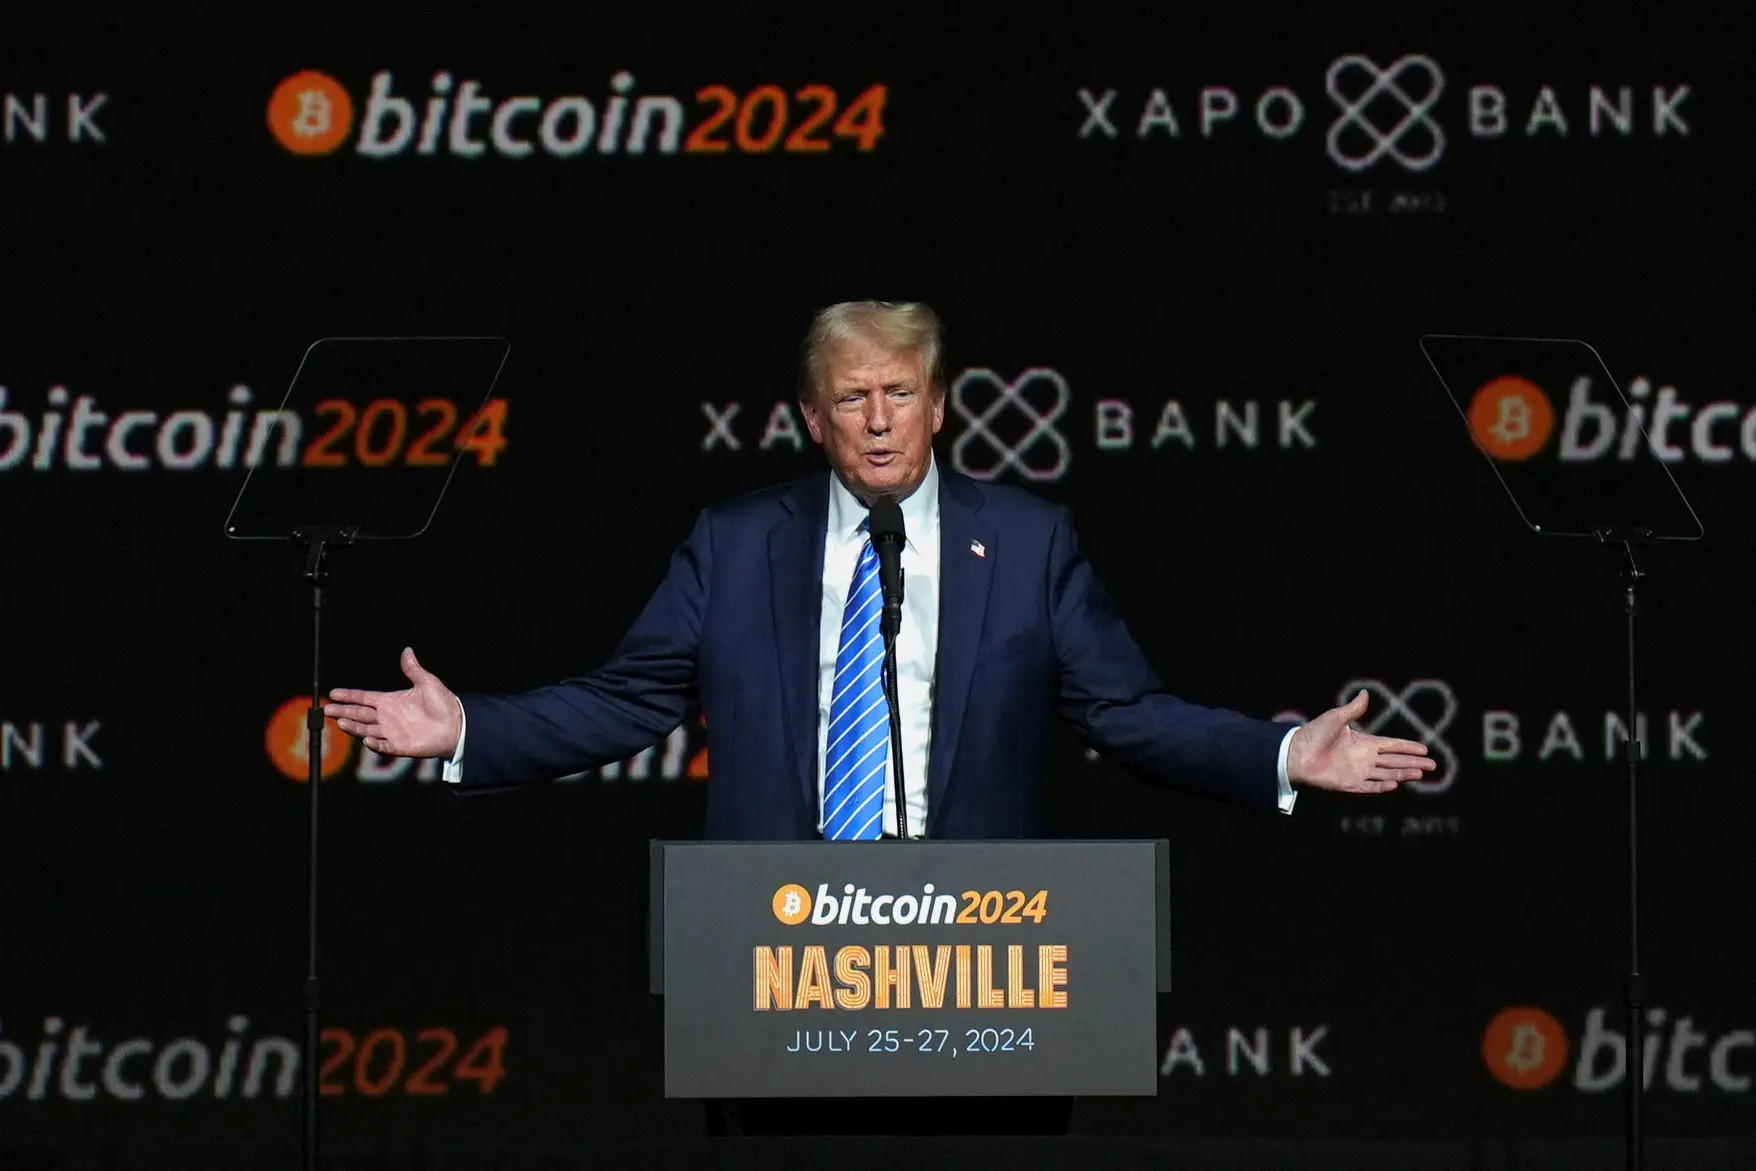 US as 'crypto capital': Donald Trump vows to make US 'Bitcoin Superpower' if re-elected 